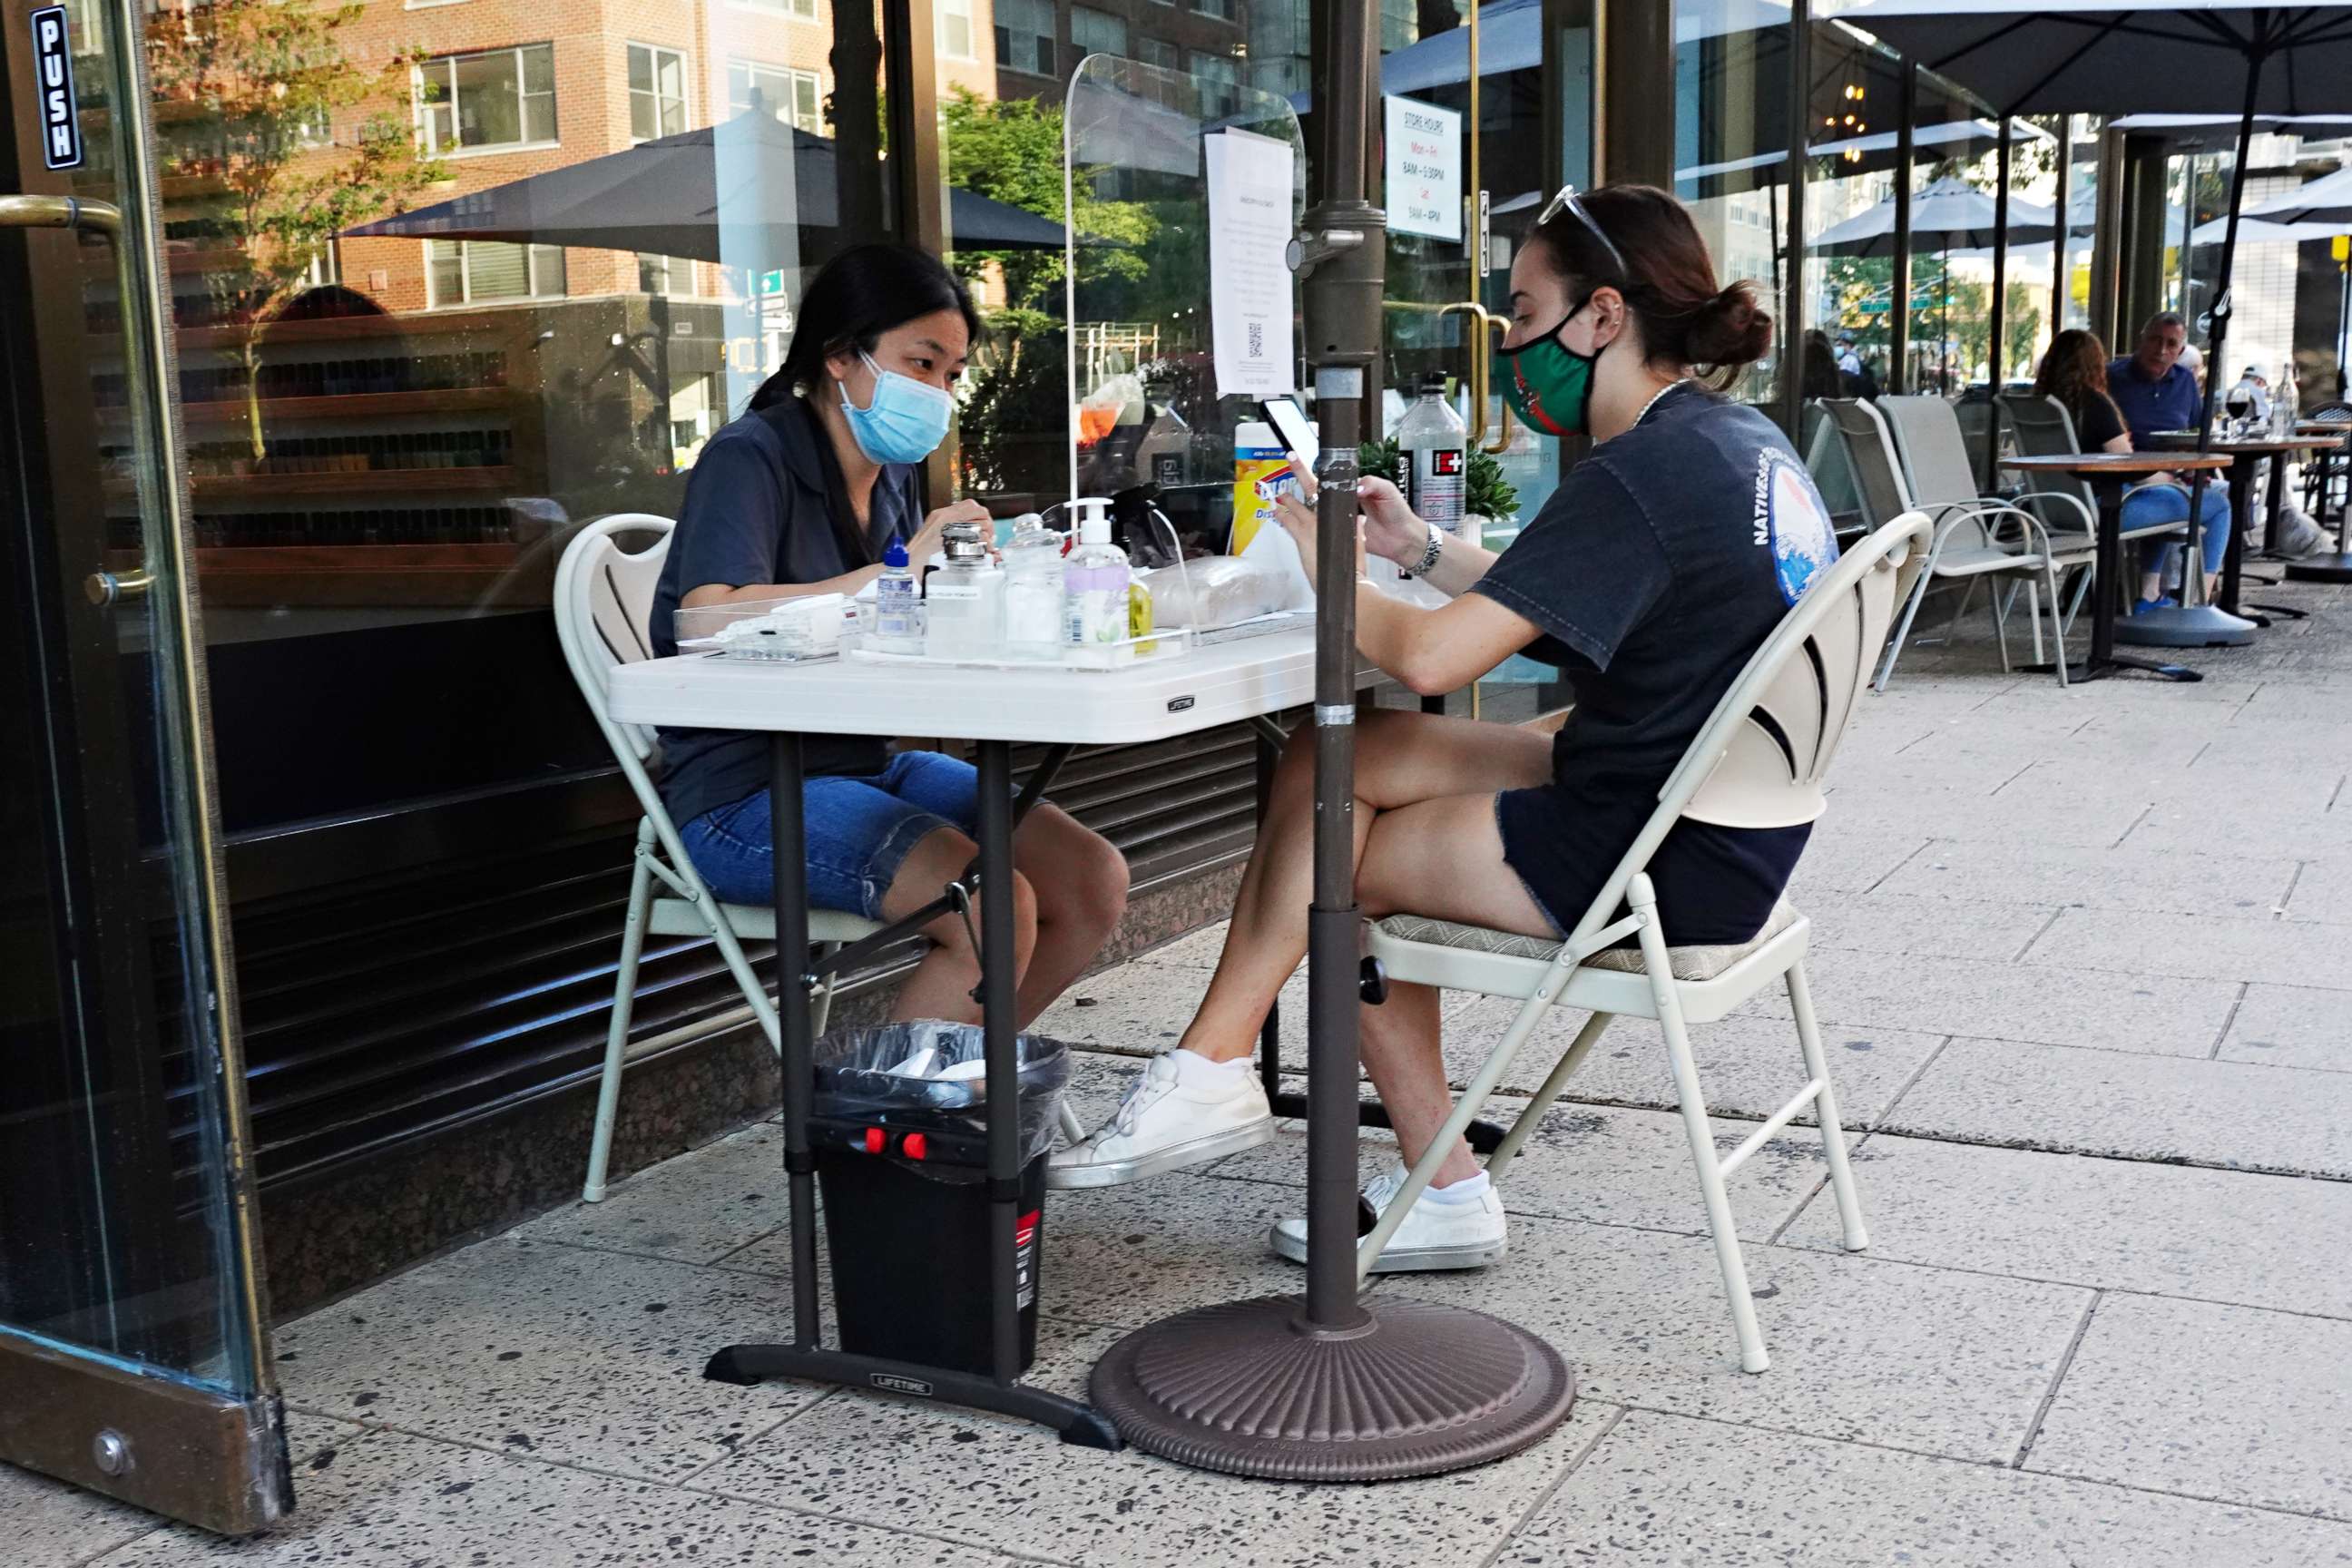 PHOTO: A woman wearing a protective mask gets a manicure at an outside station at a nail salon as the city continues Phase 4 of re-opening following restrictions imposed to slow the spread of coronavirus on August 8, 2020 in New York City. 